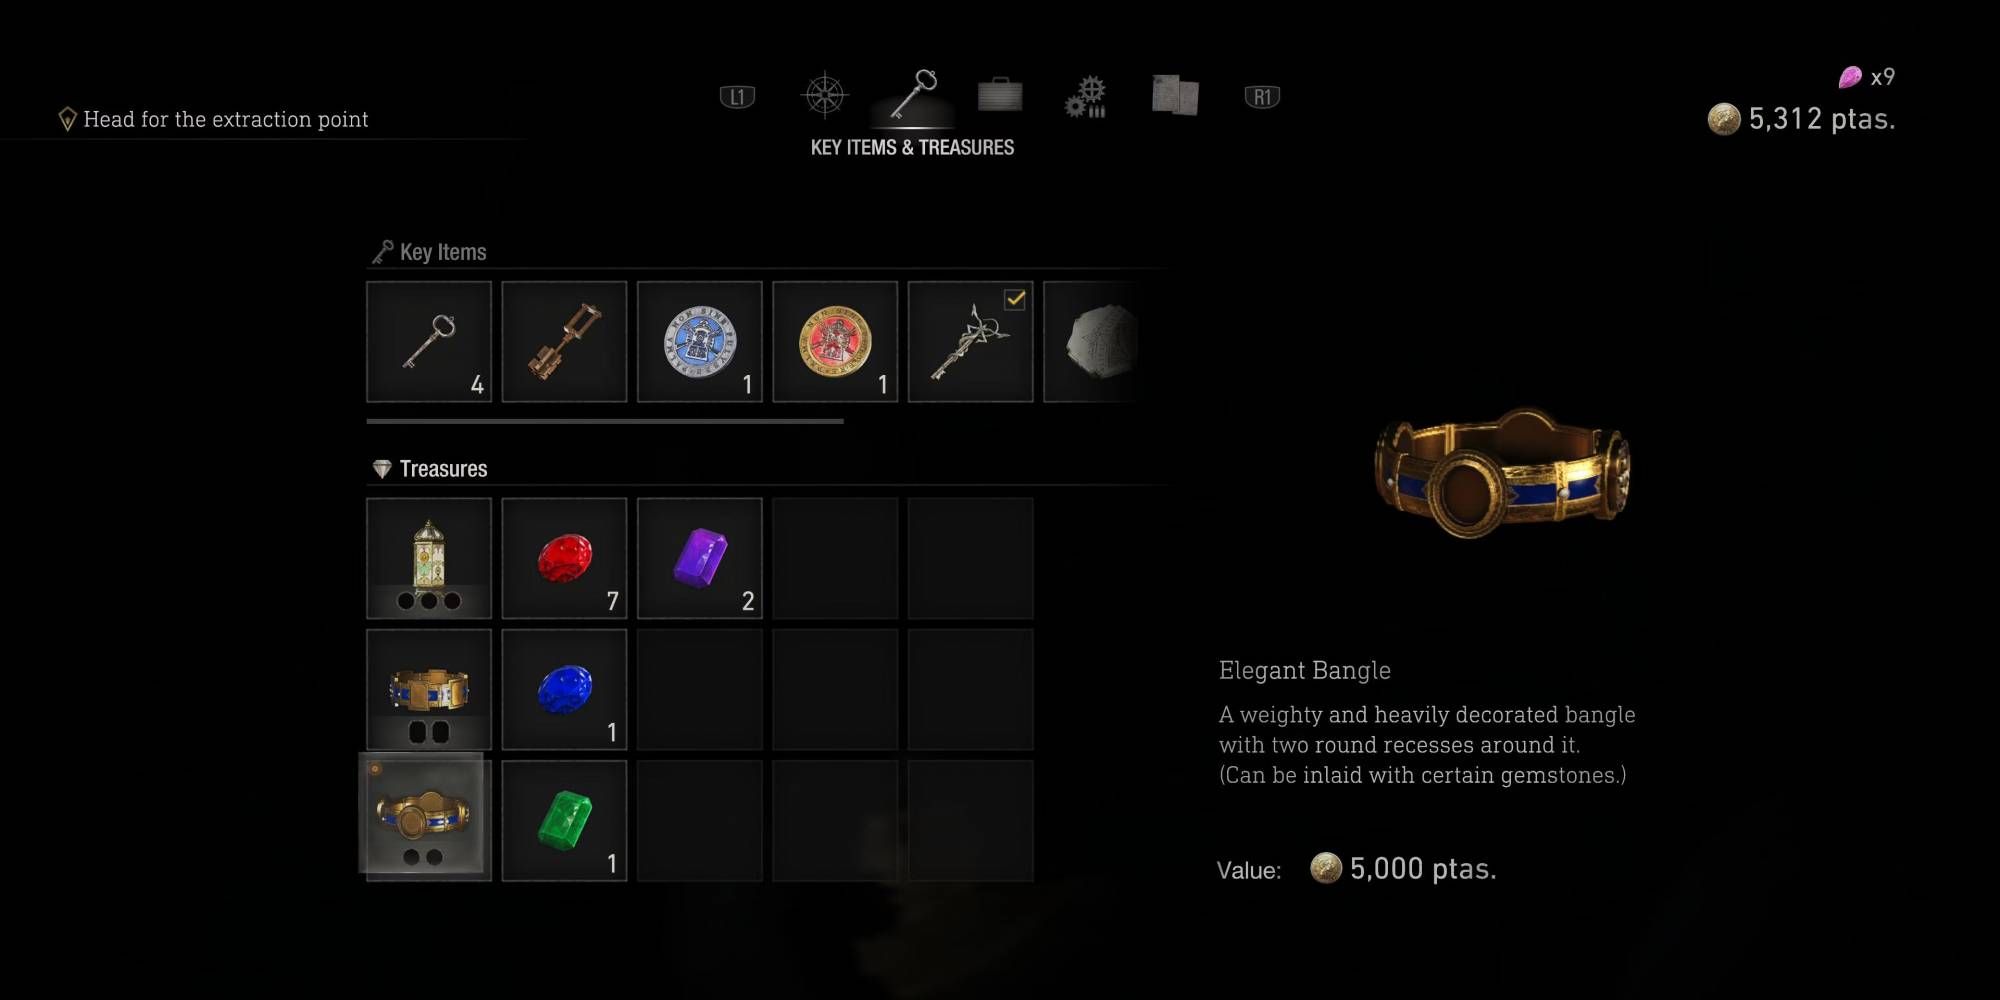 Resident Evil 4 Remake Elegant Bangle Item that Can be Altered with Gemstones Placed in Recessions on Treasure